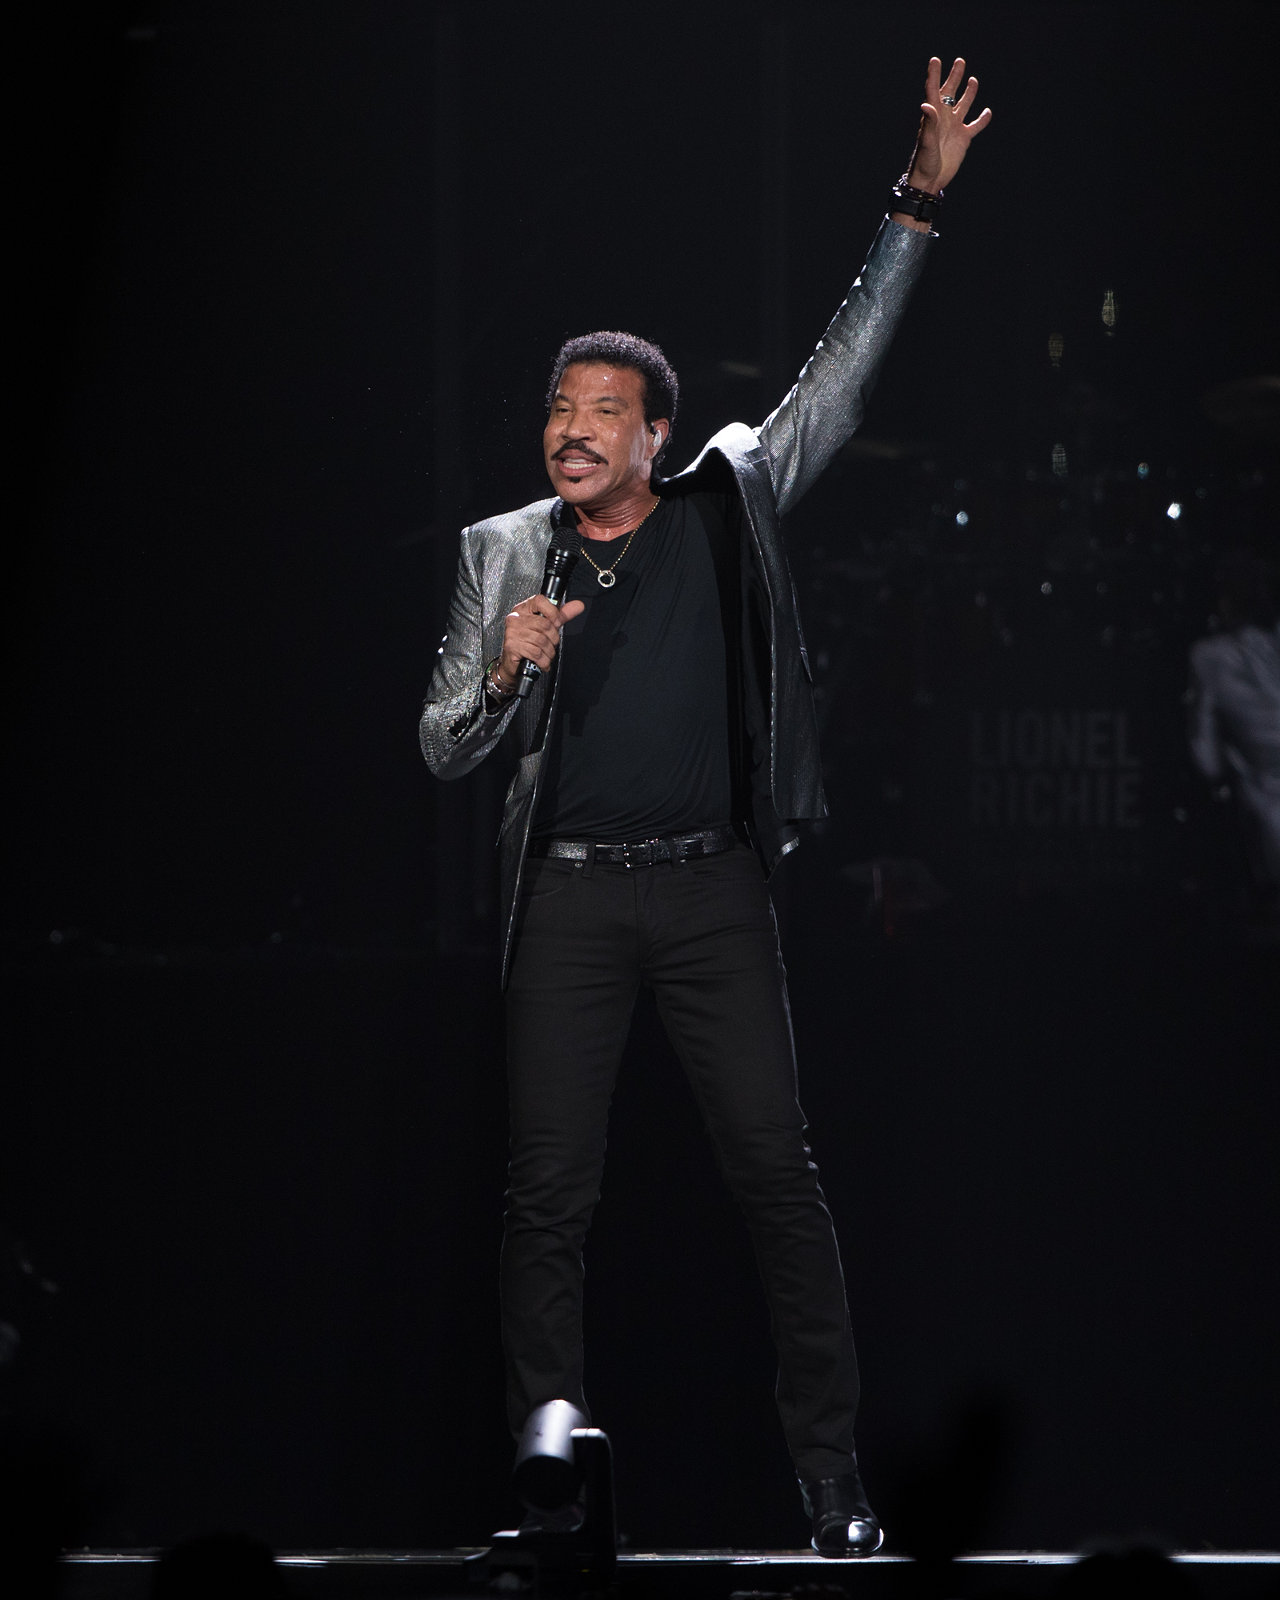 Lionel Richie plays Amalie Arena in Tampa, Florida on August 11, 2017.